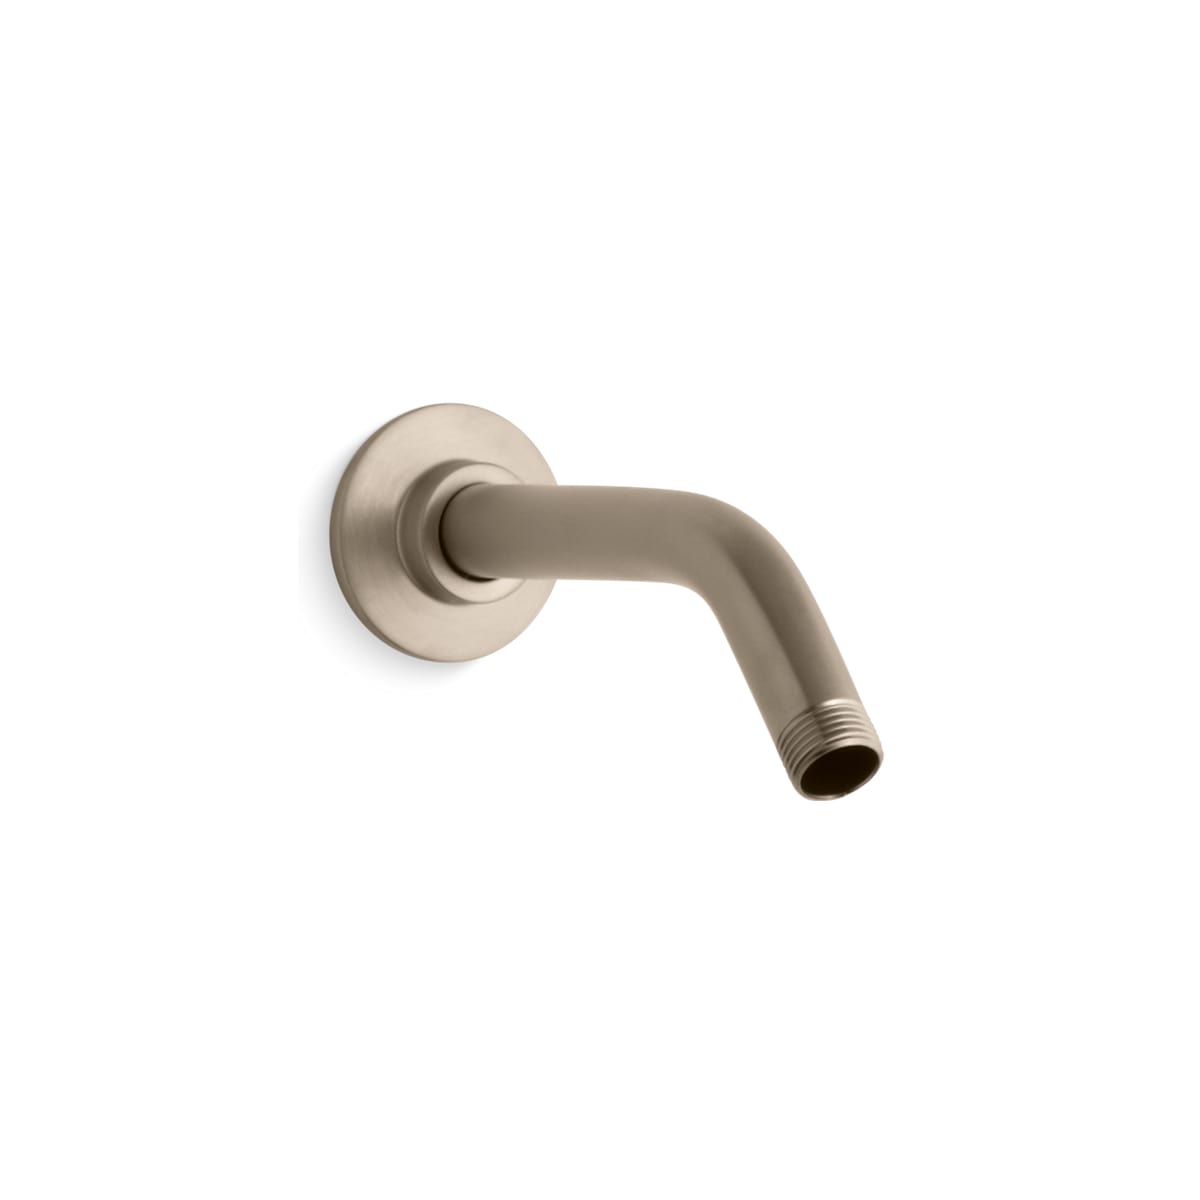 New Shower Arm And Flange In Vibrant Brushed Nickel 7-1/2 In 